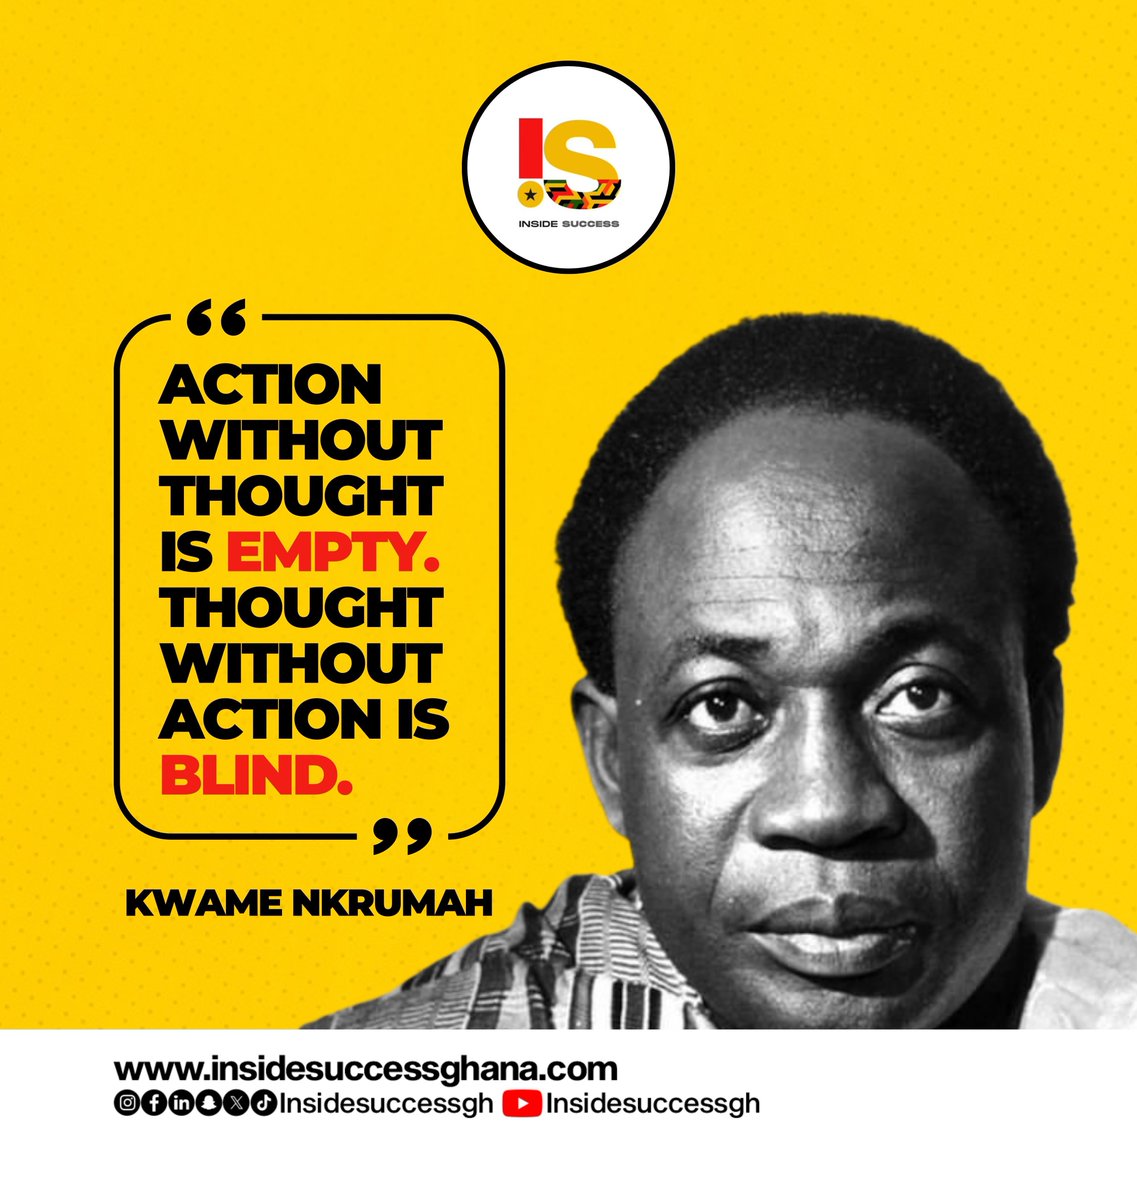 Welcome a to new week, always remember to accompany your positive thoughts with decisive actions! Wishing you a wonderful week ahead!
#mondaymotivation #insidesuccessgh #nsidesuccessghana #visitghana #accraghana #KwameNkrumah #greatness #instagram #reels #viral